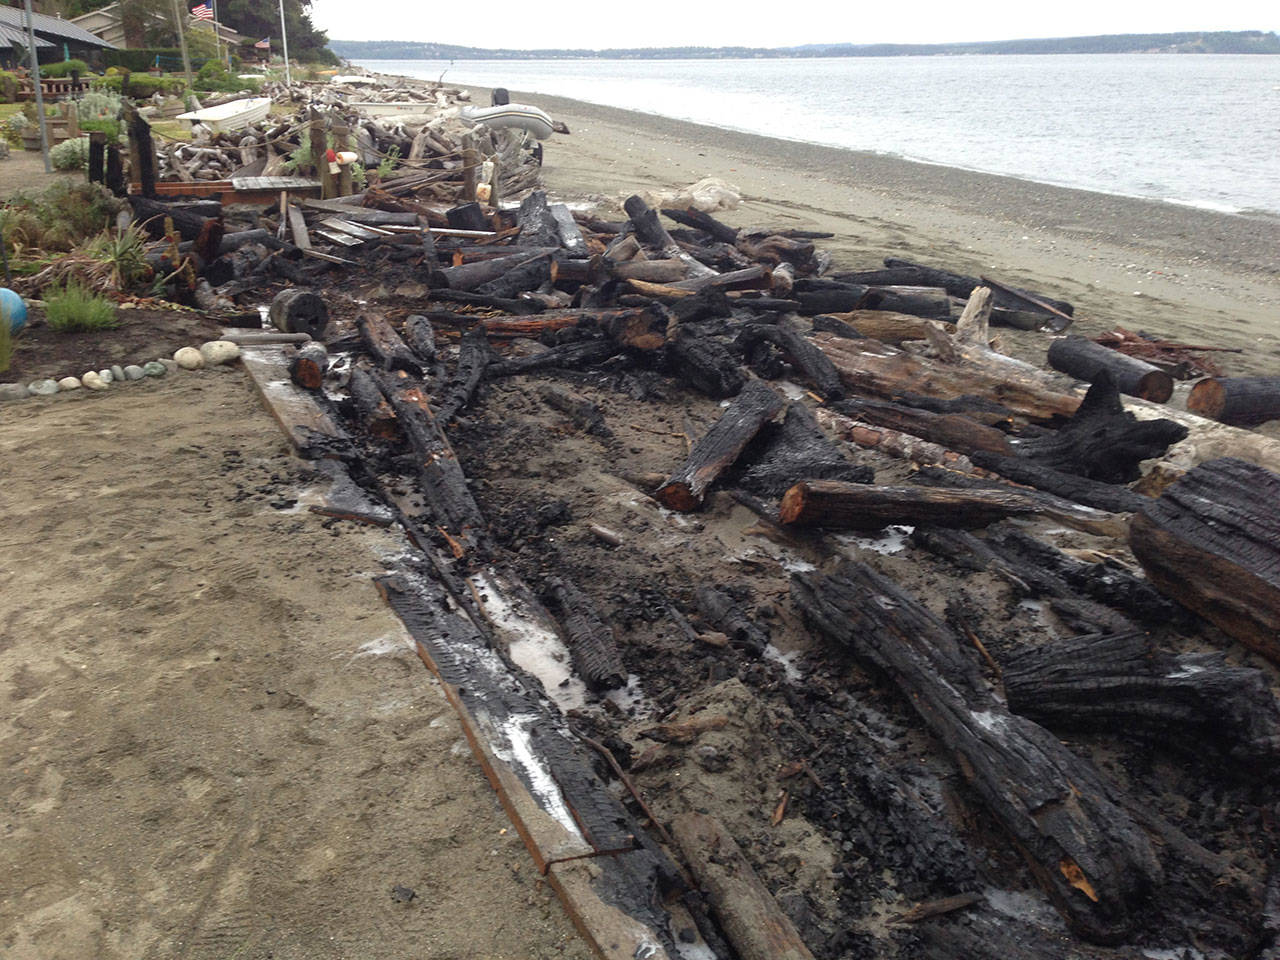 Driftwood blaze the result of unattended beach fire, official says